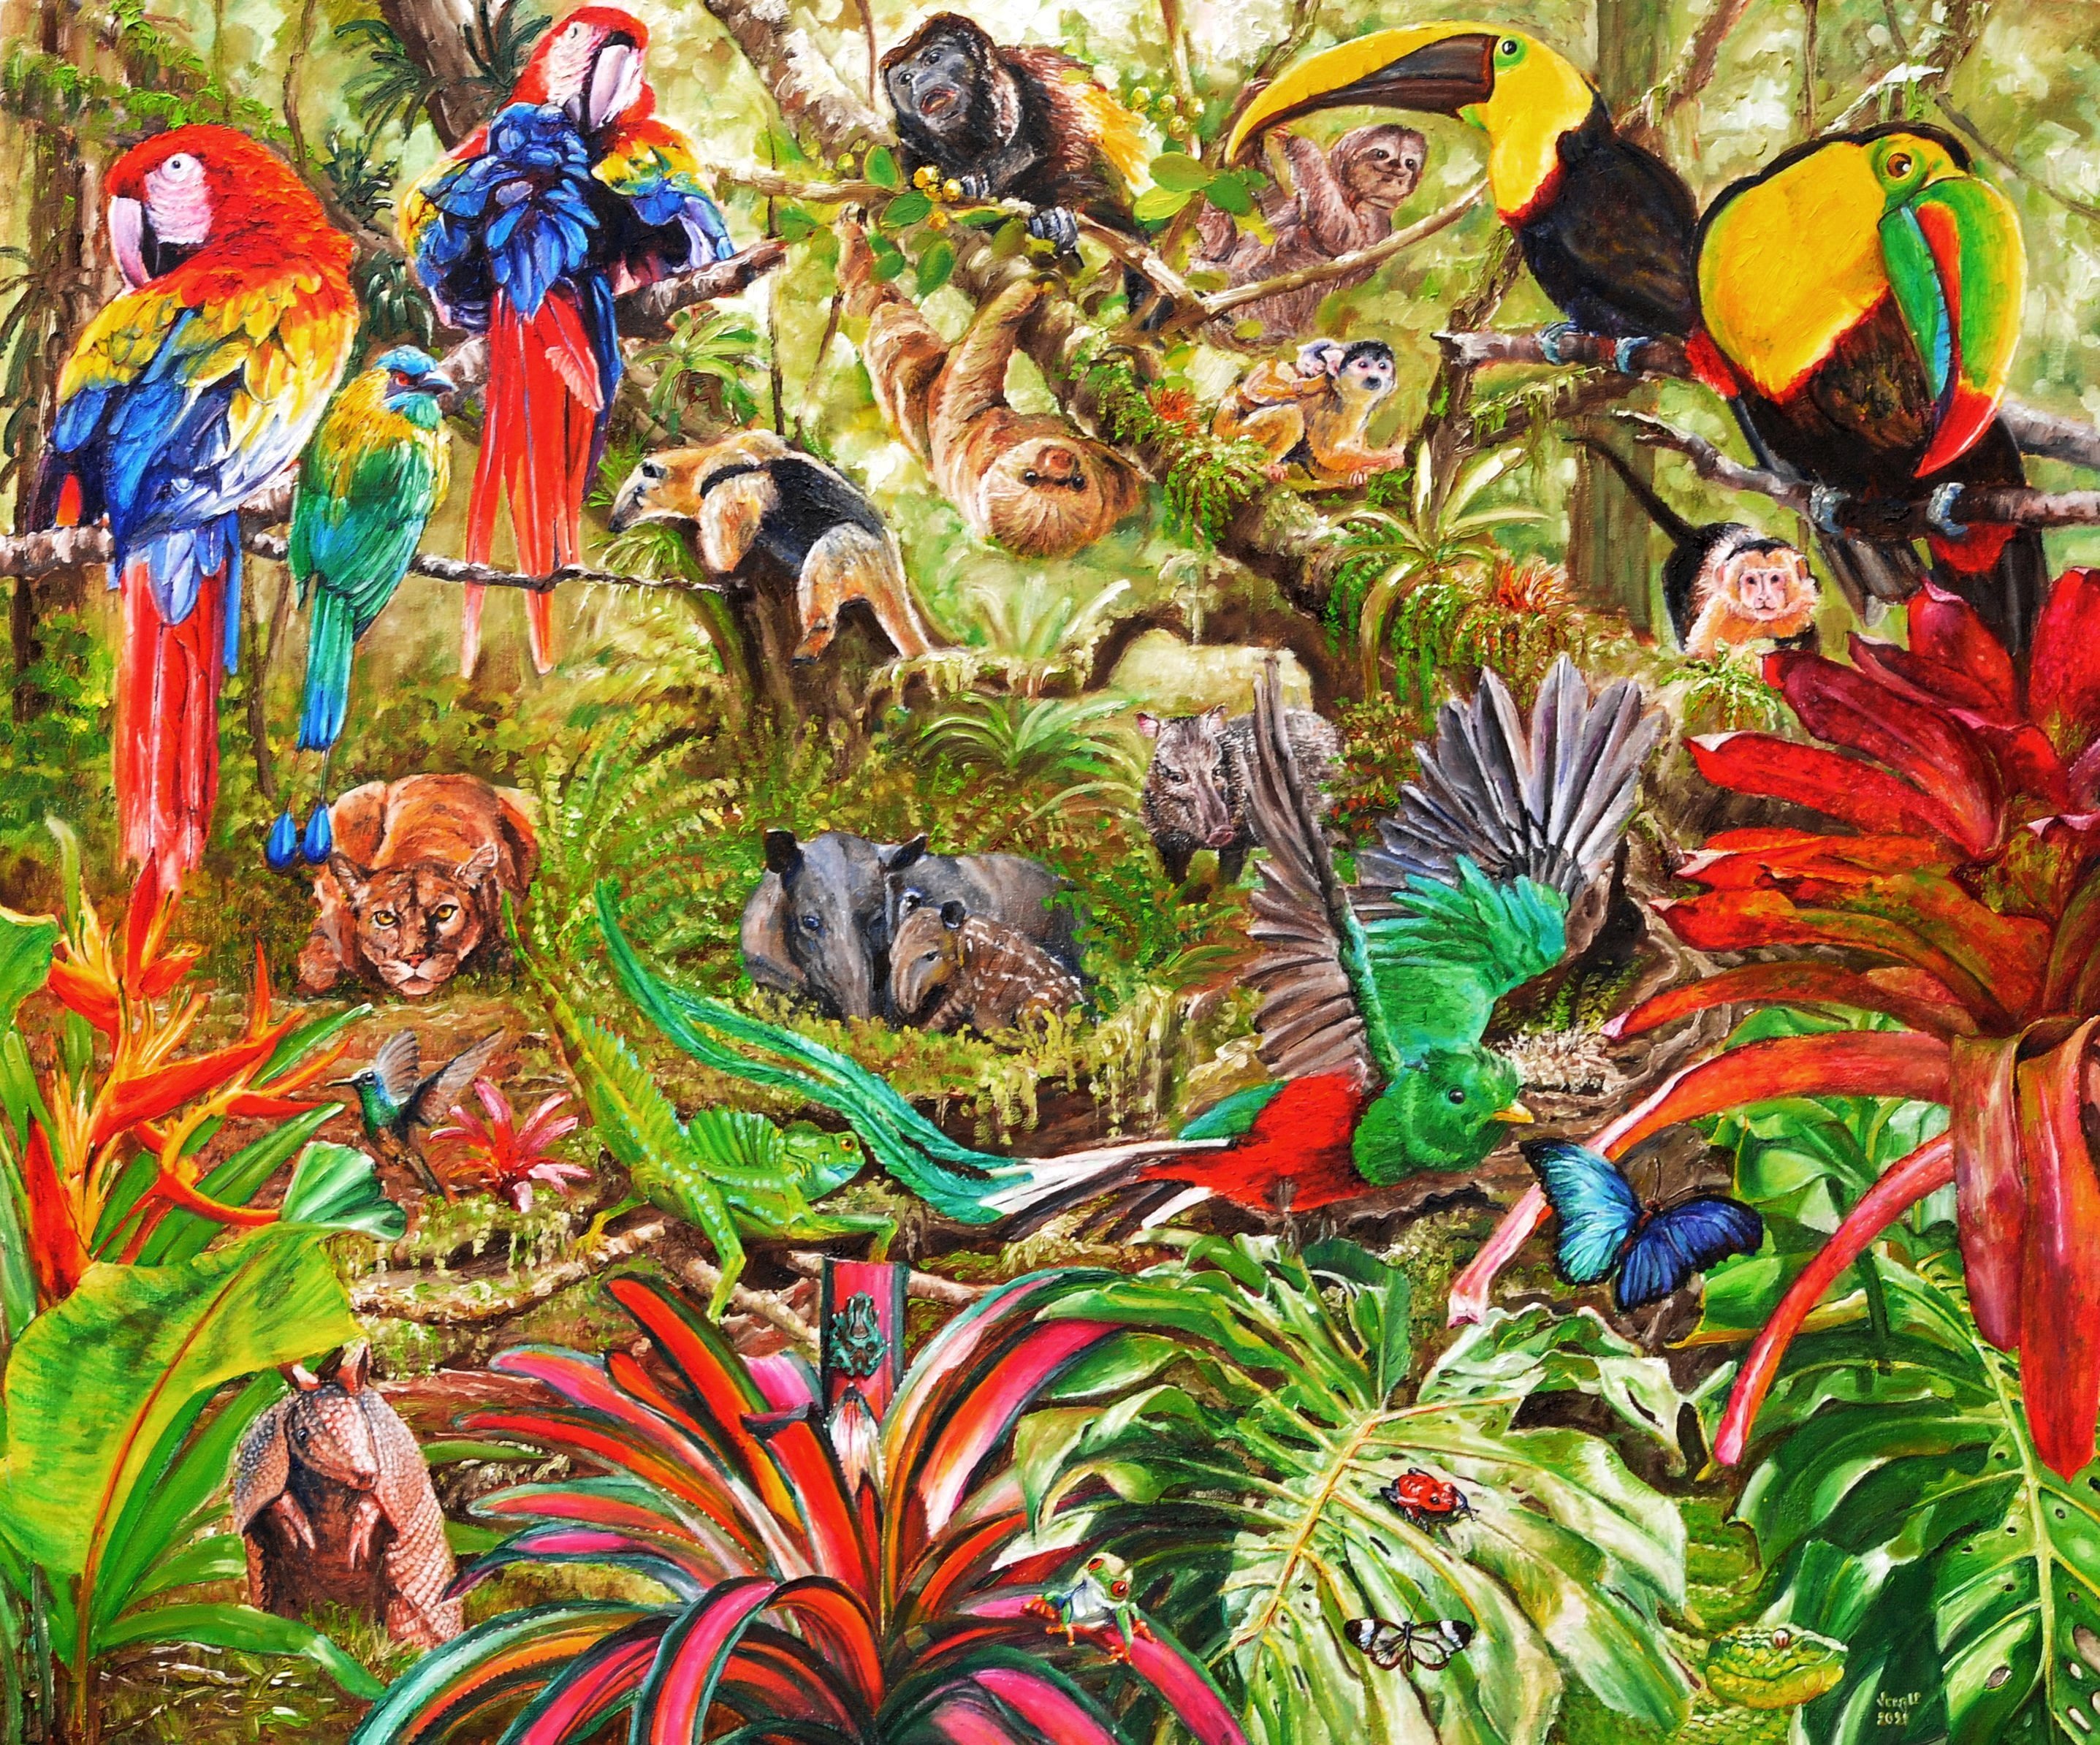 Meso American fauna and flora | Oil paint on linen | Year: 2021 | Dimensions: 100x120cm